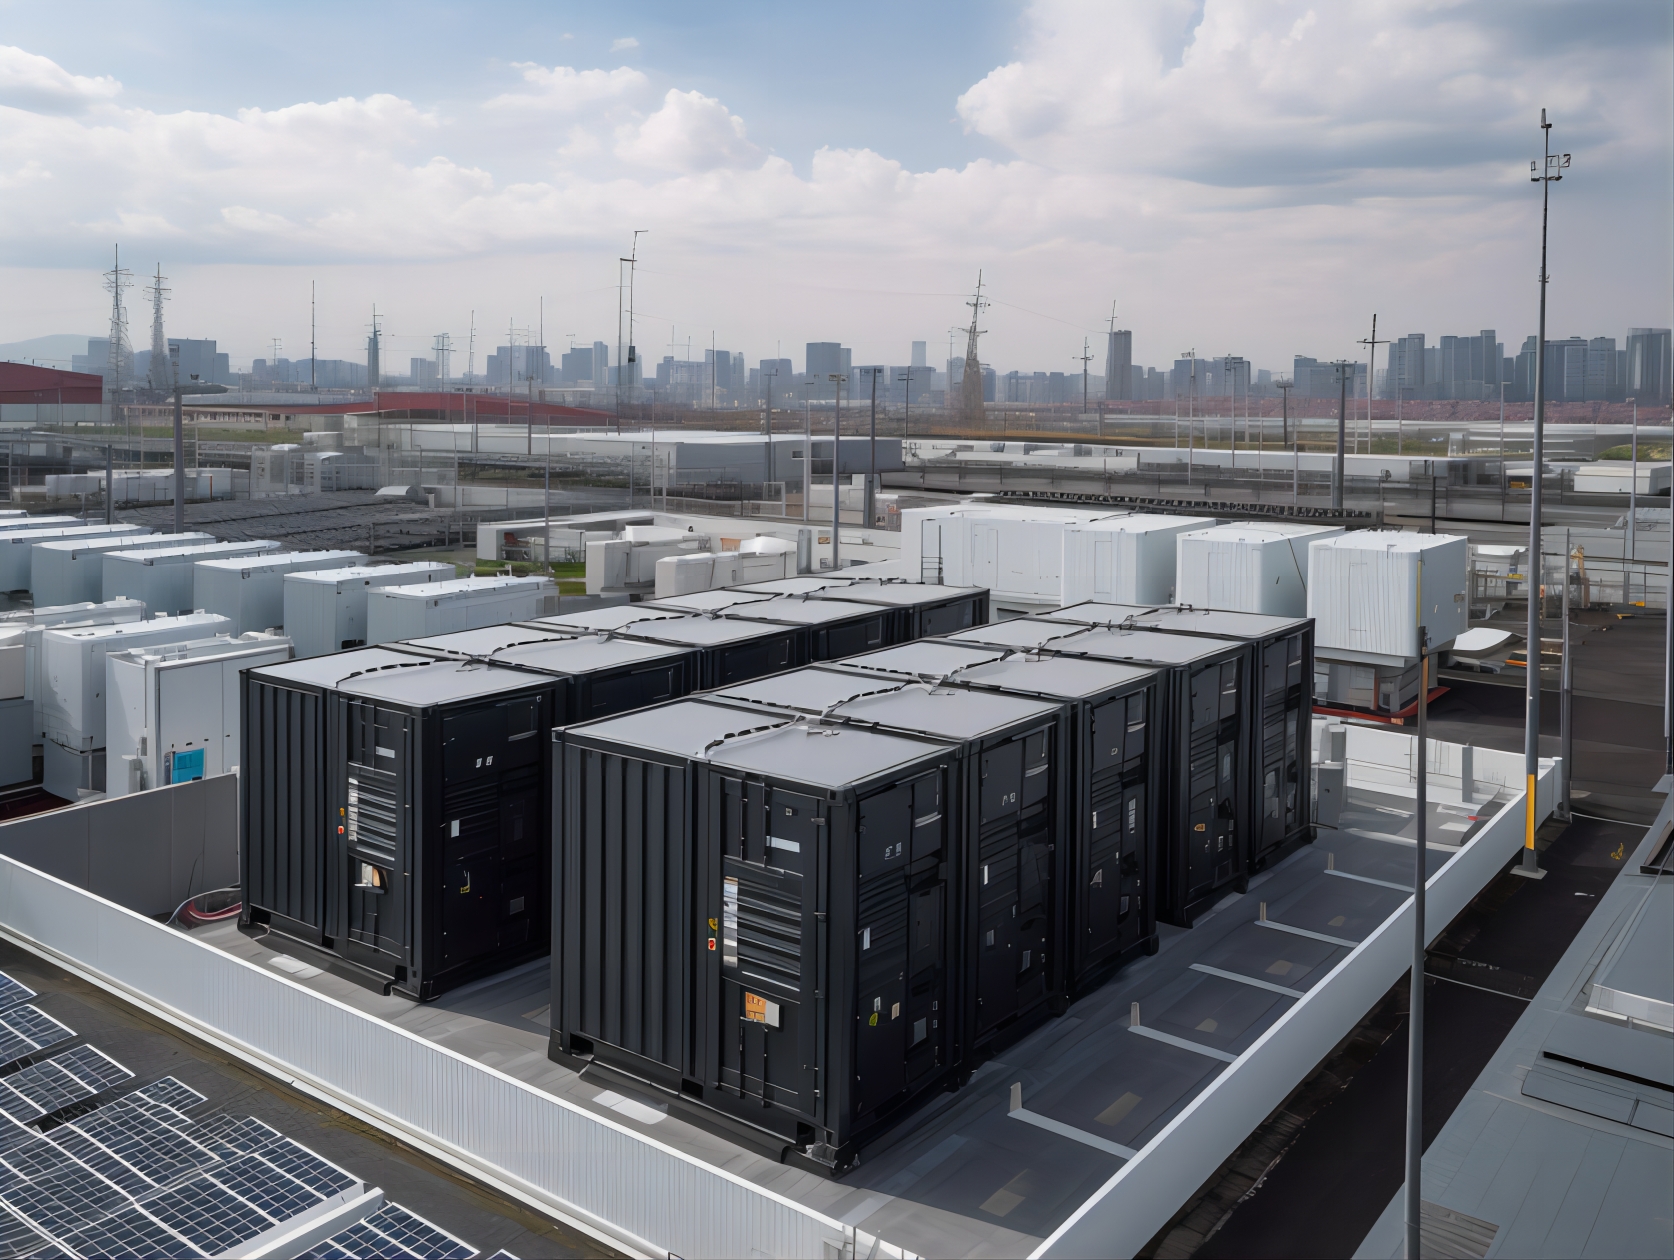 Which types of energy storage systems are commonly used